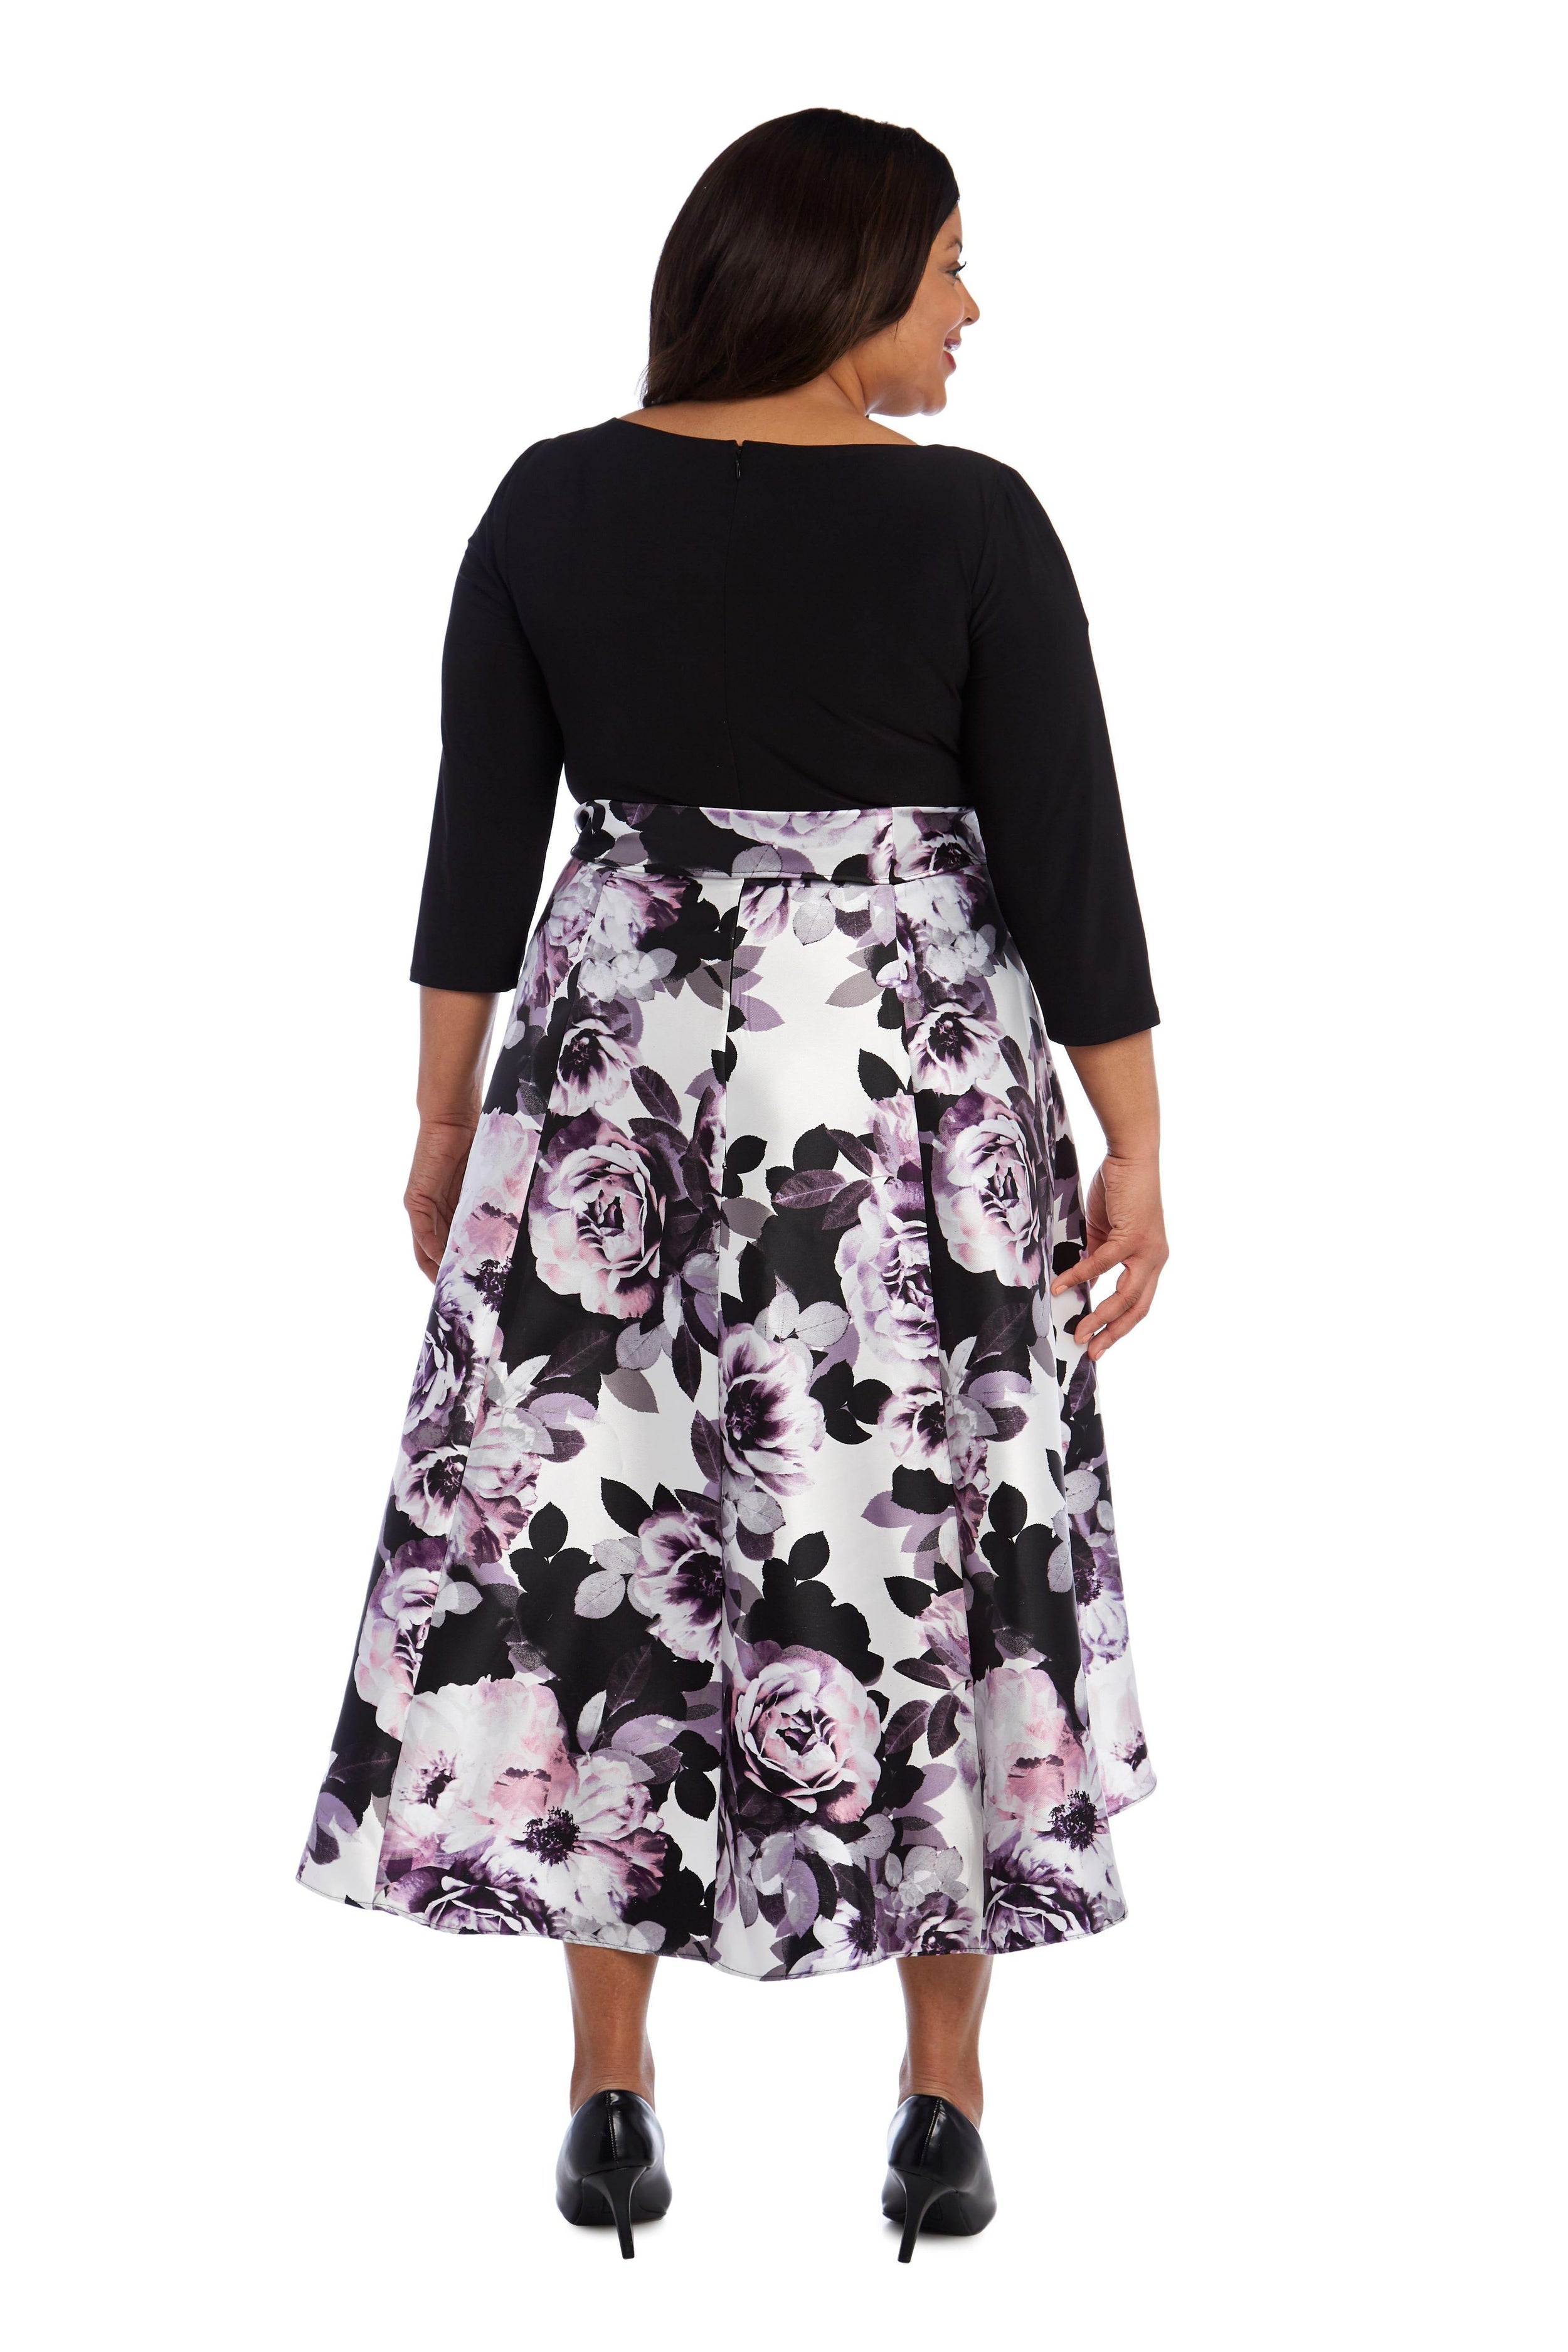 R&M Richards High Low Mother of the Bride Print Dress 5050W - The Dress Outlet